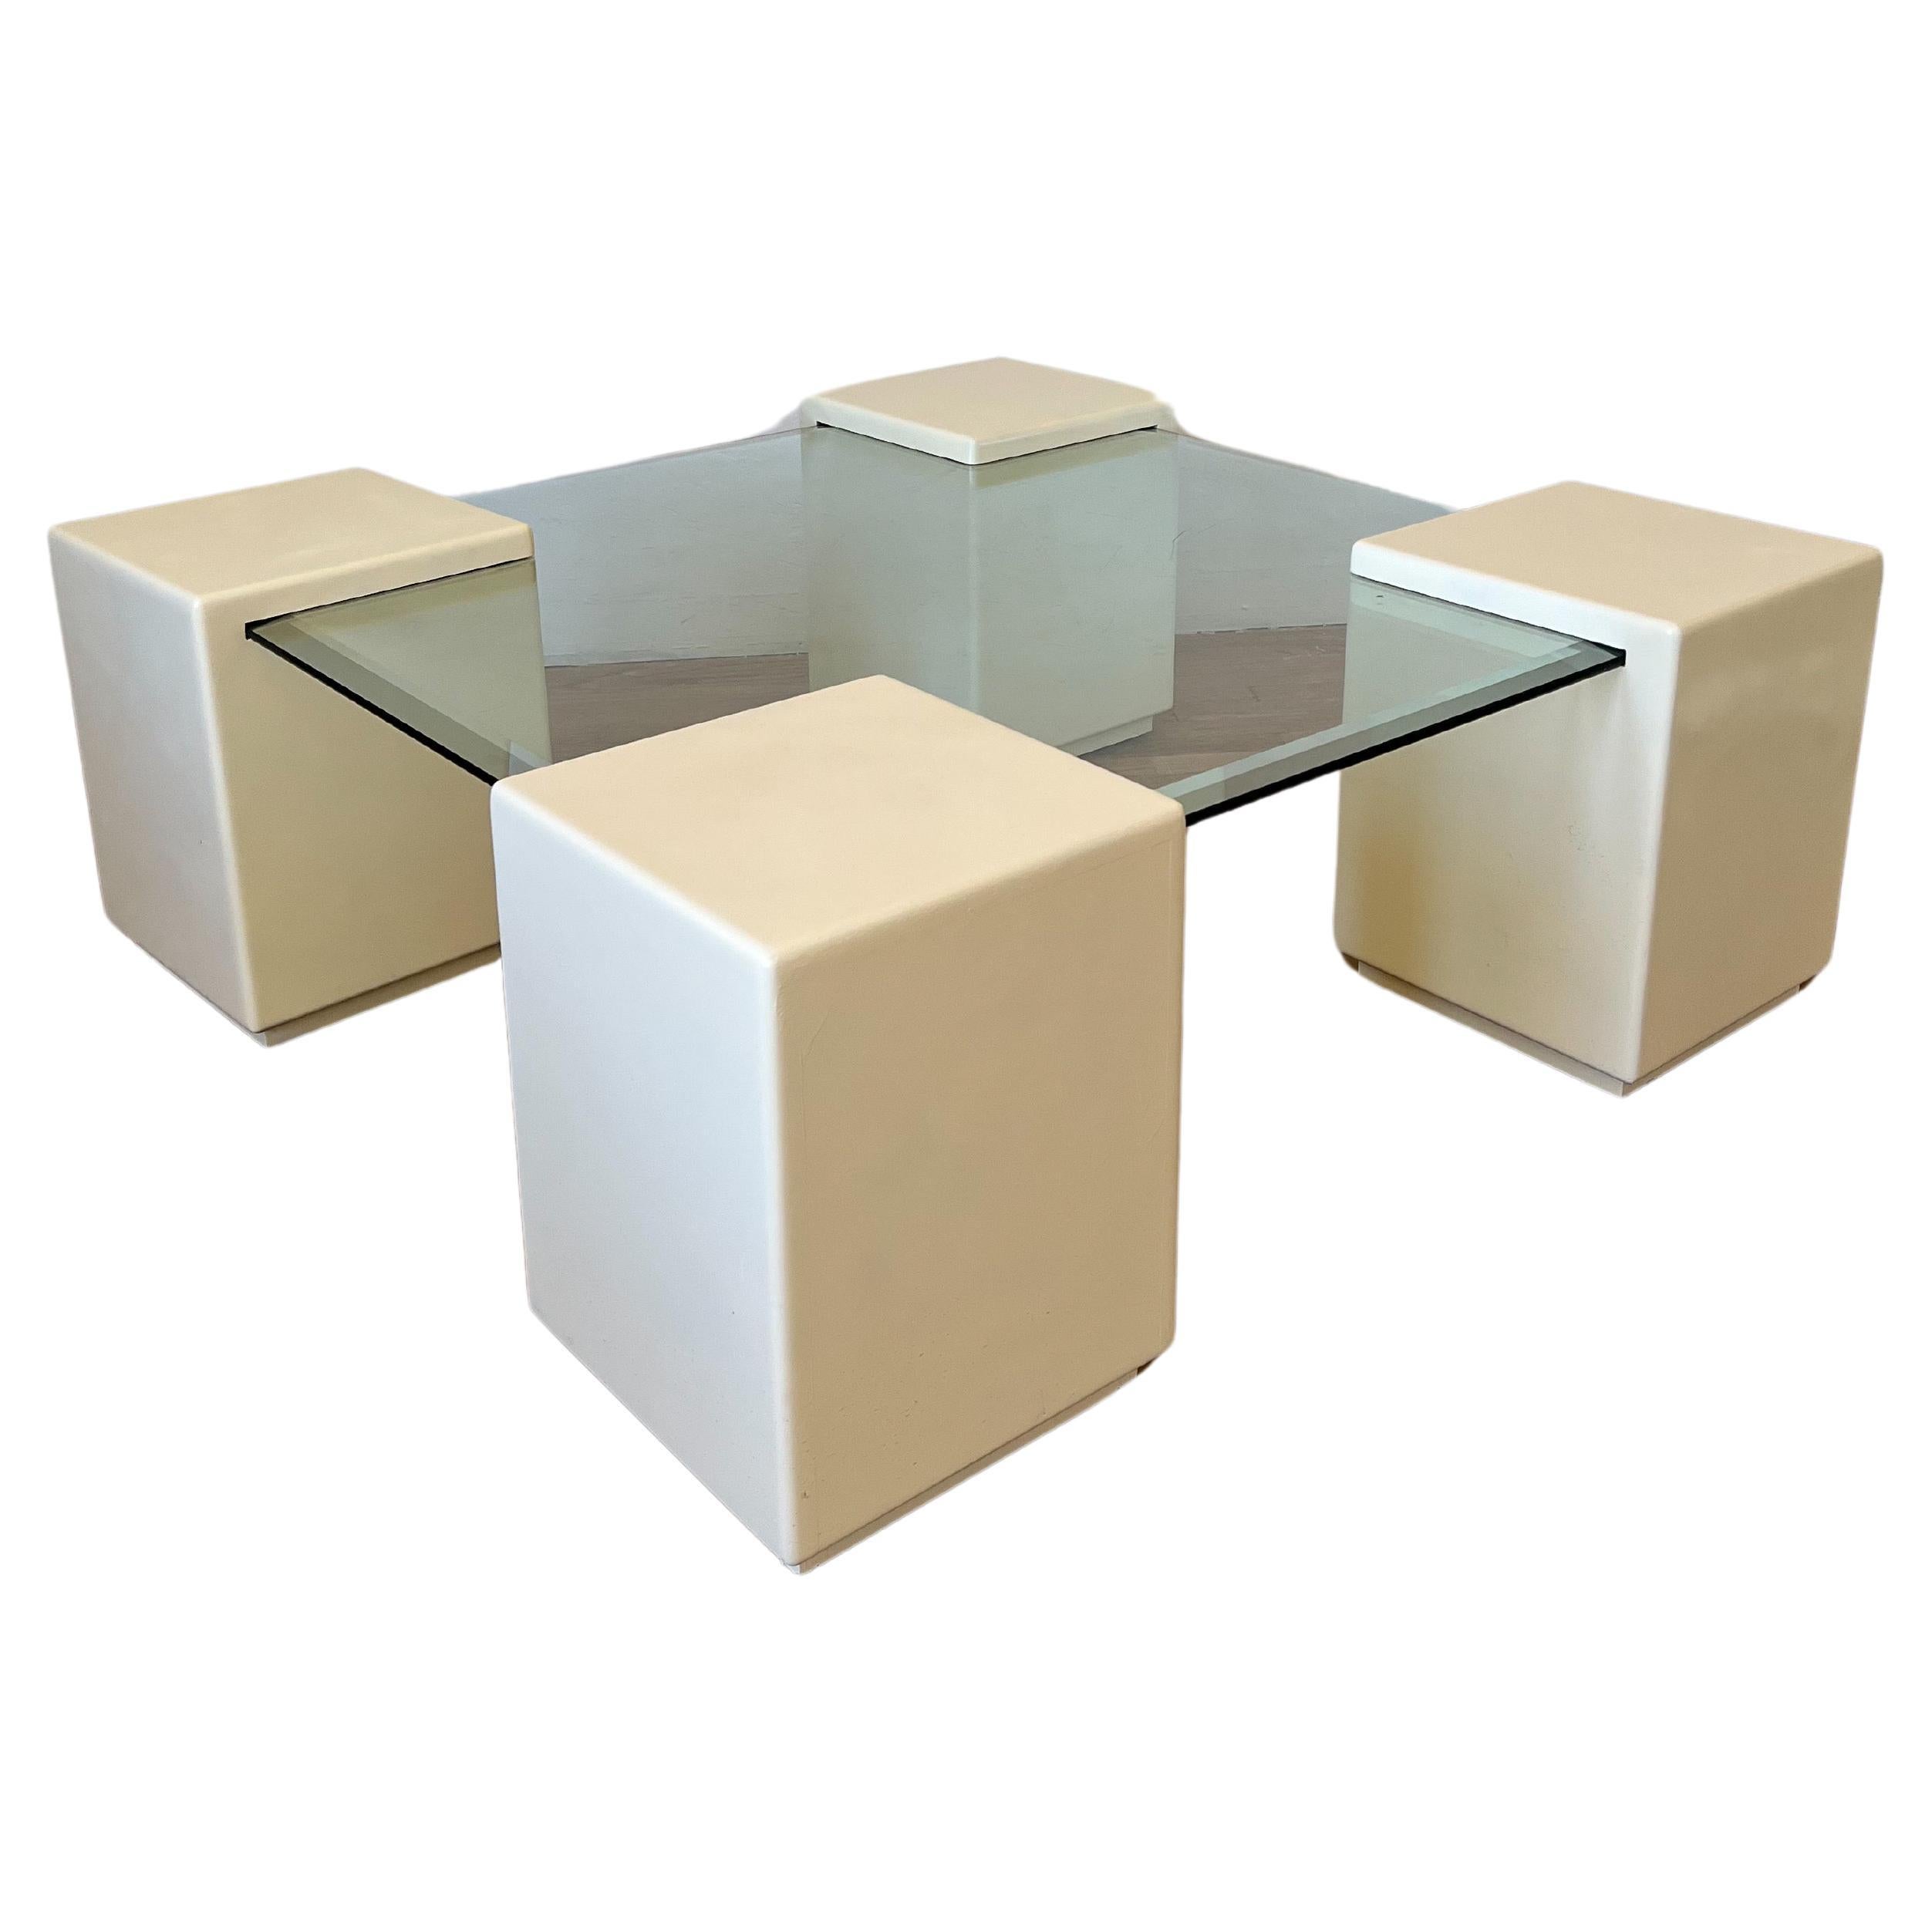 Modernist sculptural oak coffee table in an “origami” shape. Geometrical nooks are perfect to store books or magazines. Top has been professionally refinished and shows the grain of the oak beautifully. This is an incredible one of a kind piece.